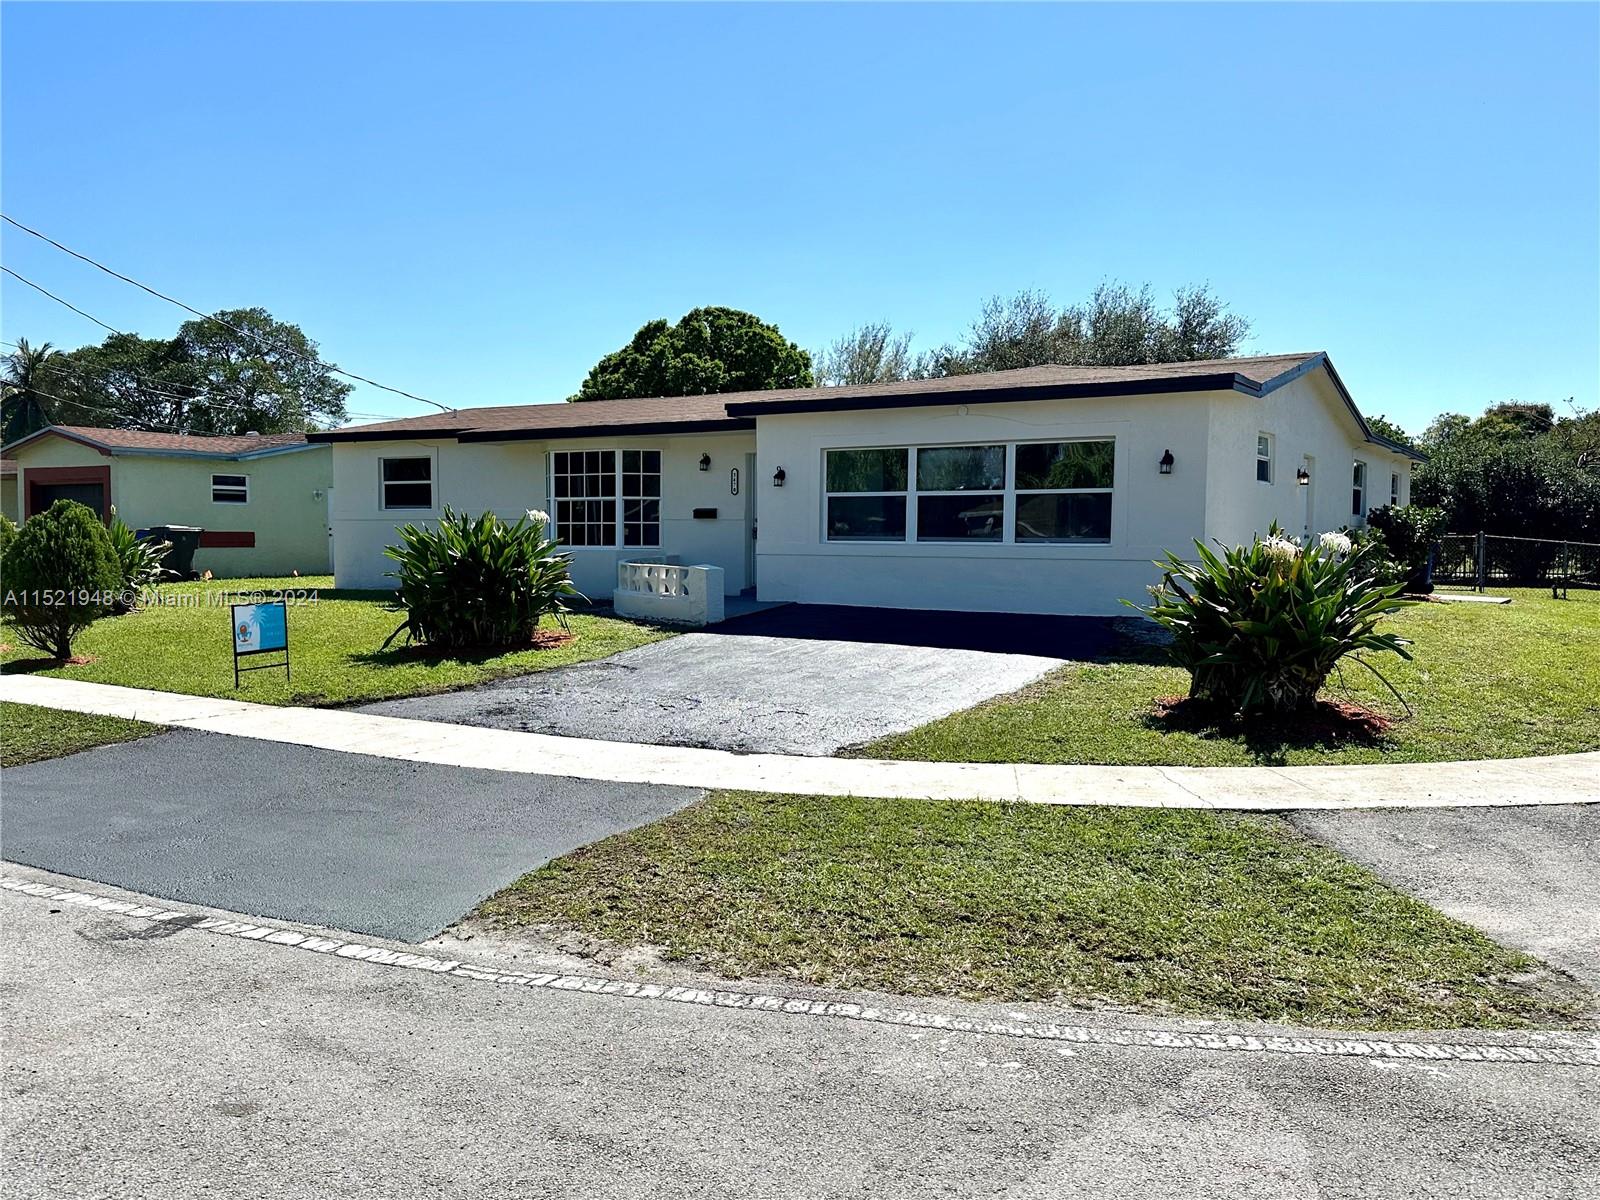 3470 Nw 39th St St, Lauderdale Lakes, Broward County, Florida - 5 Bedrooms  
2 Bathrooms - 